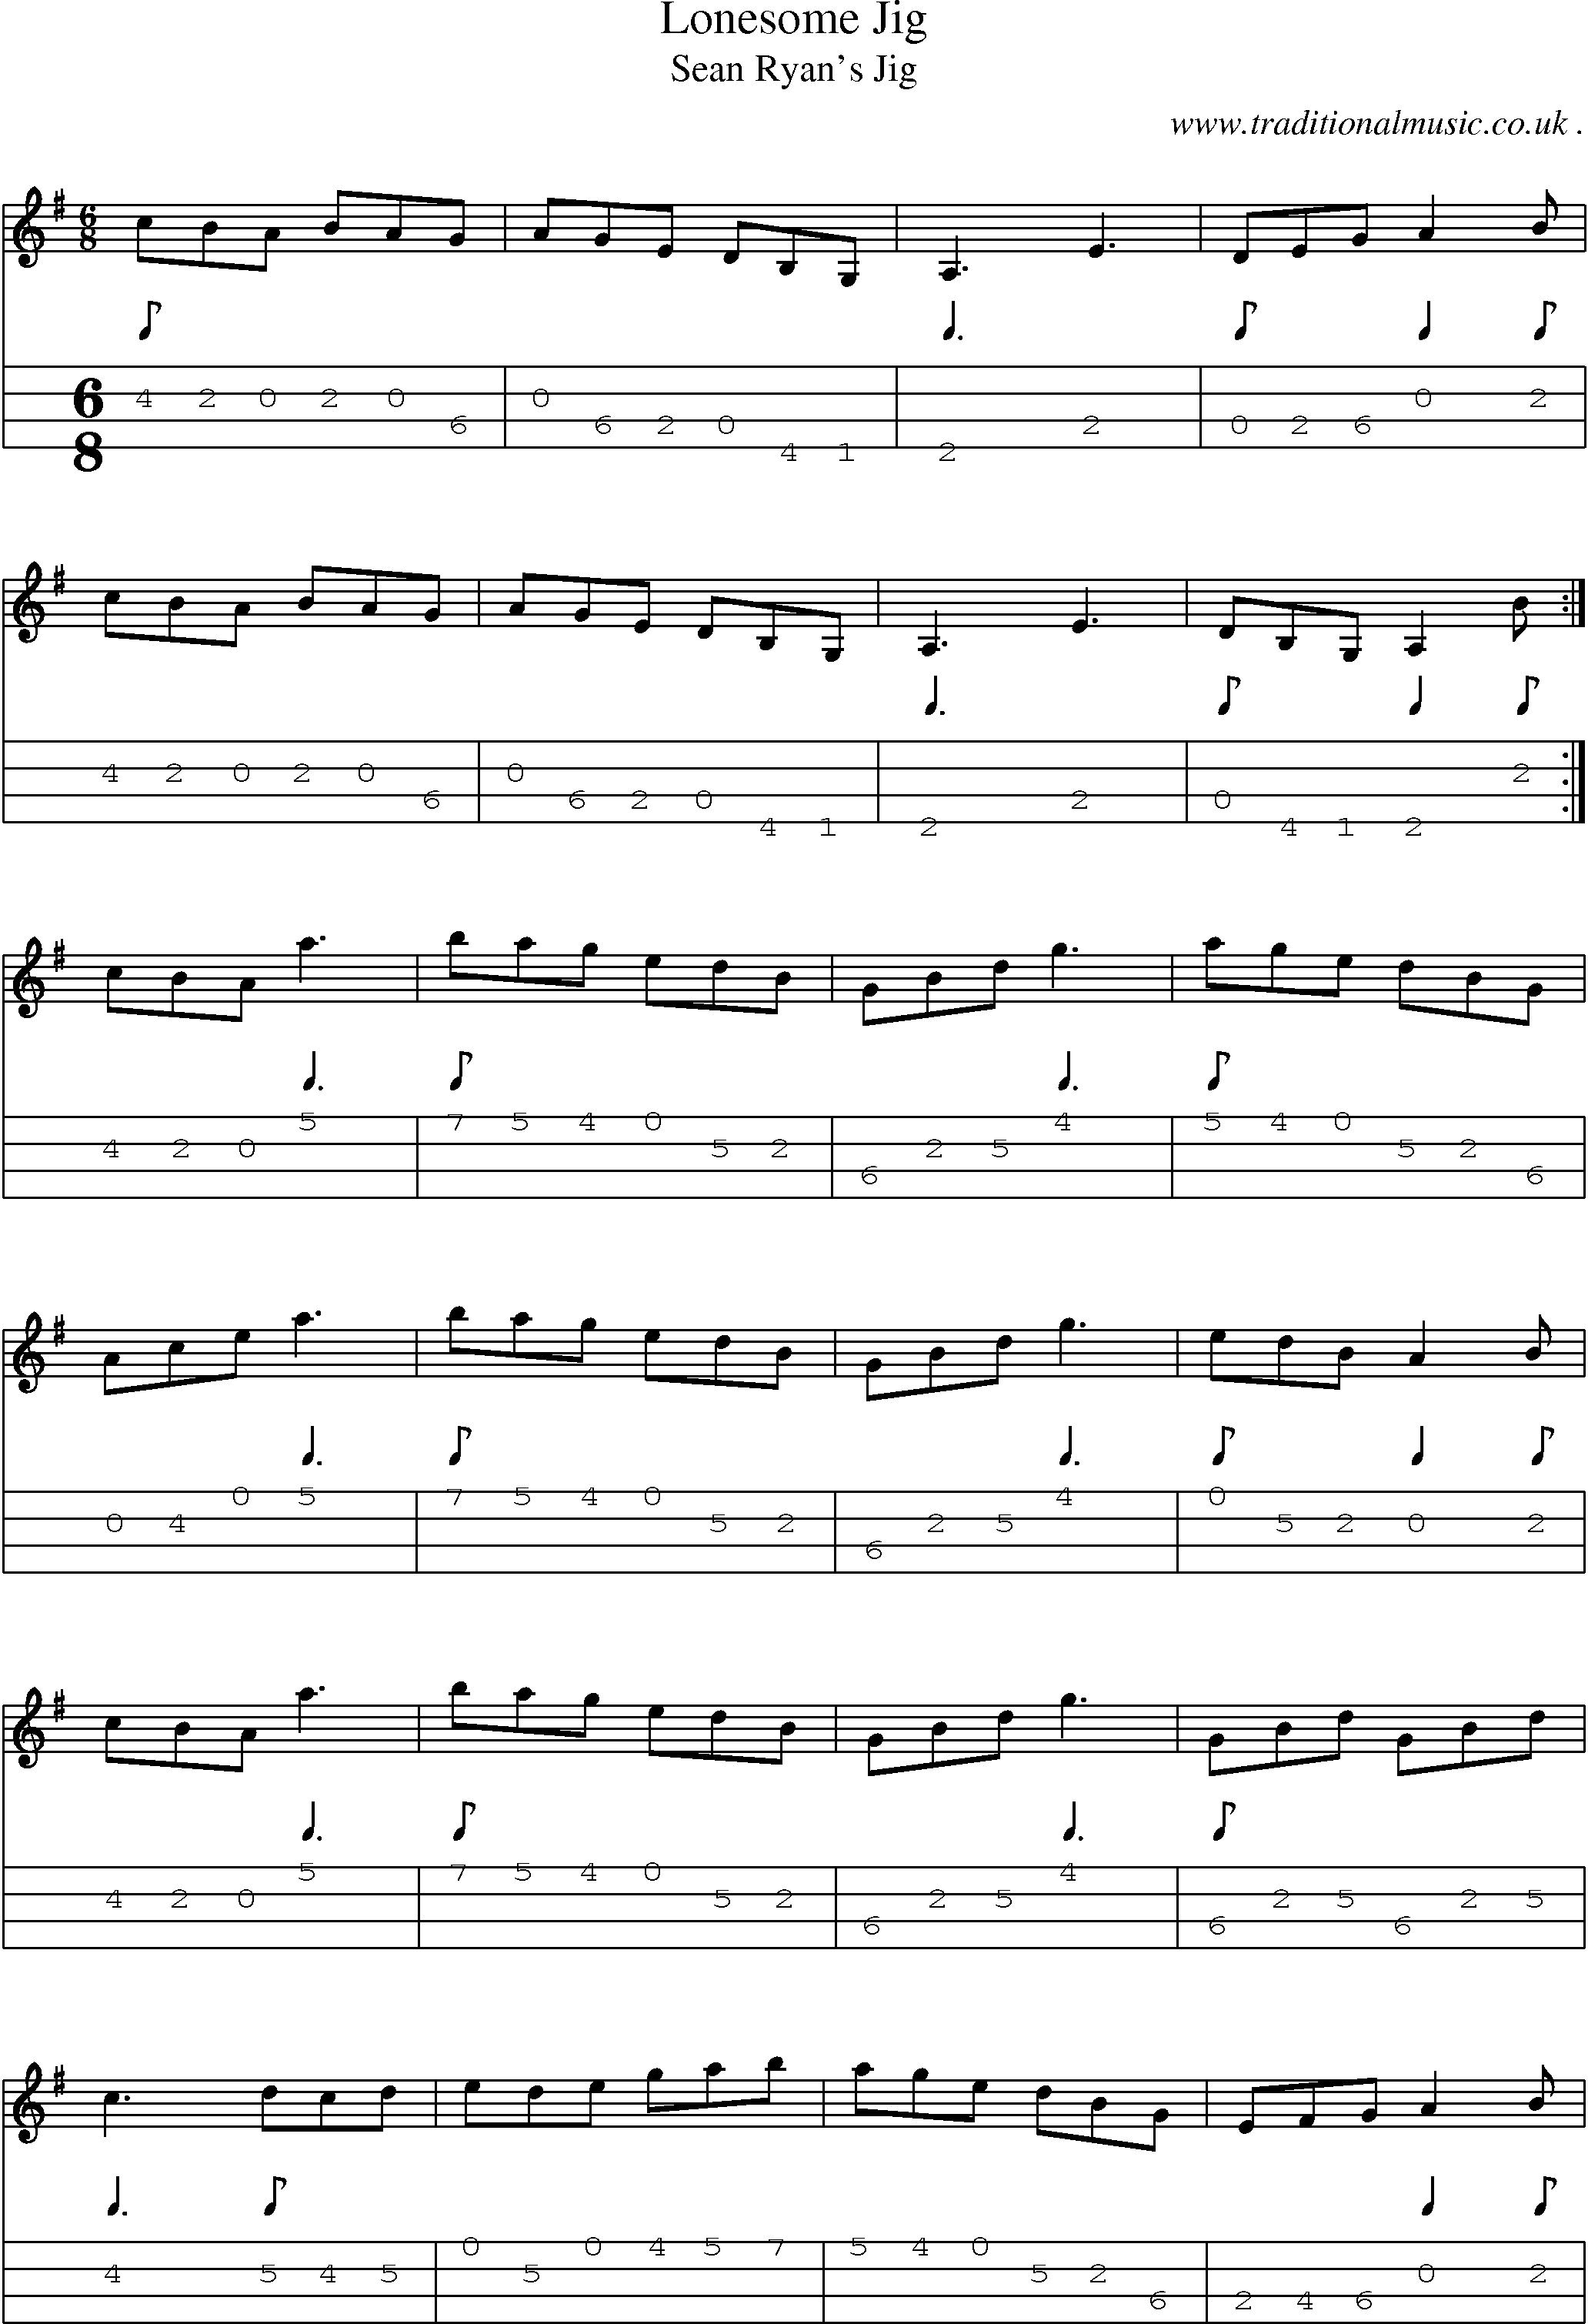 Sheet-Music and Mandolin Tabs for Lonesome Jig